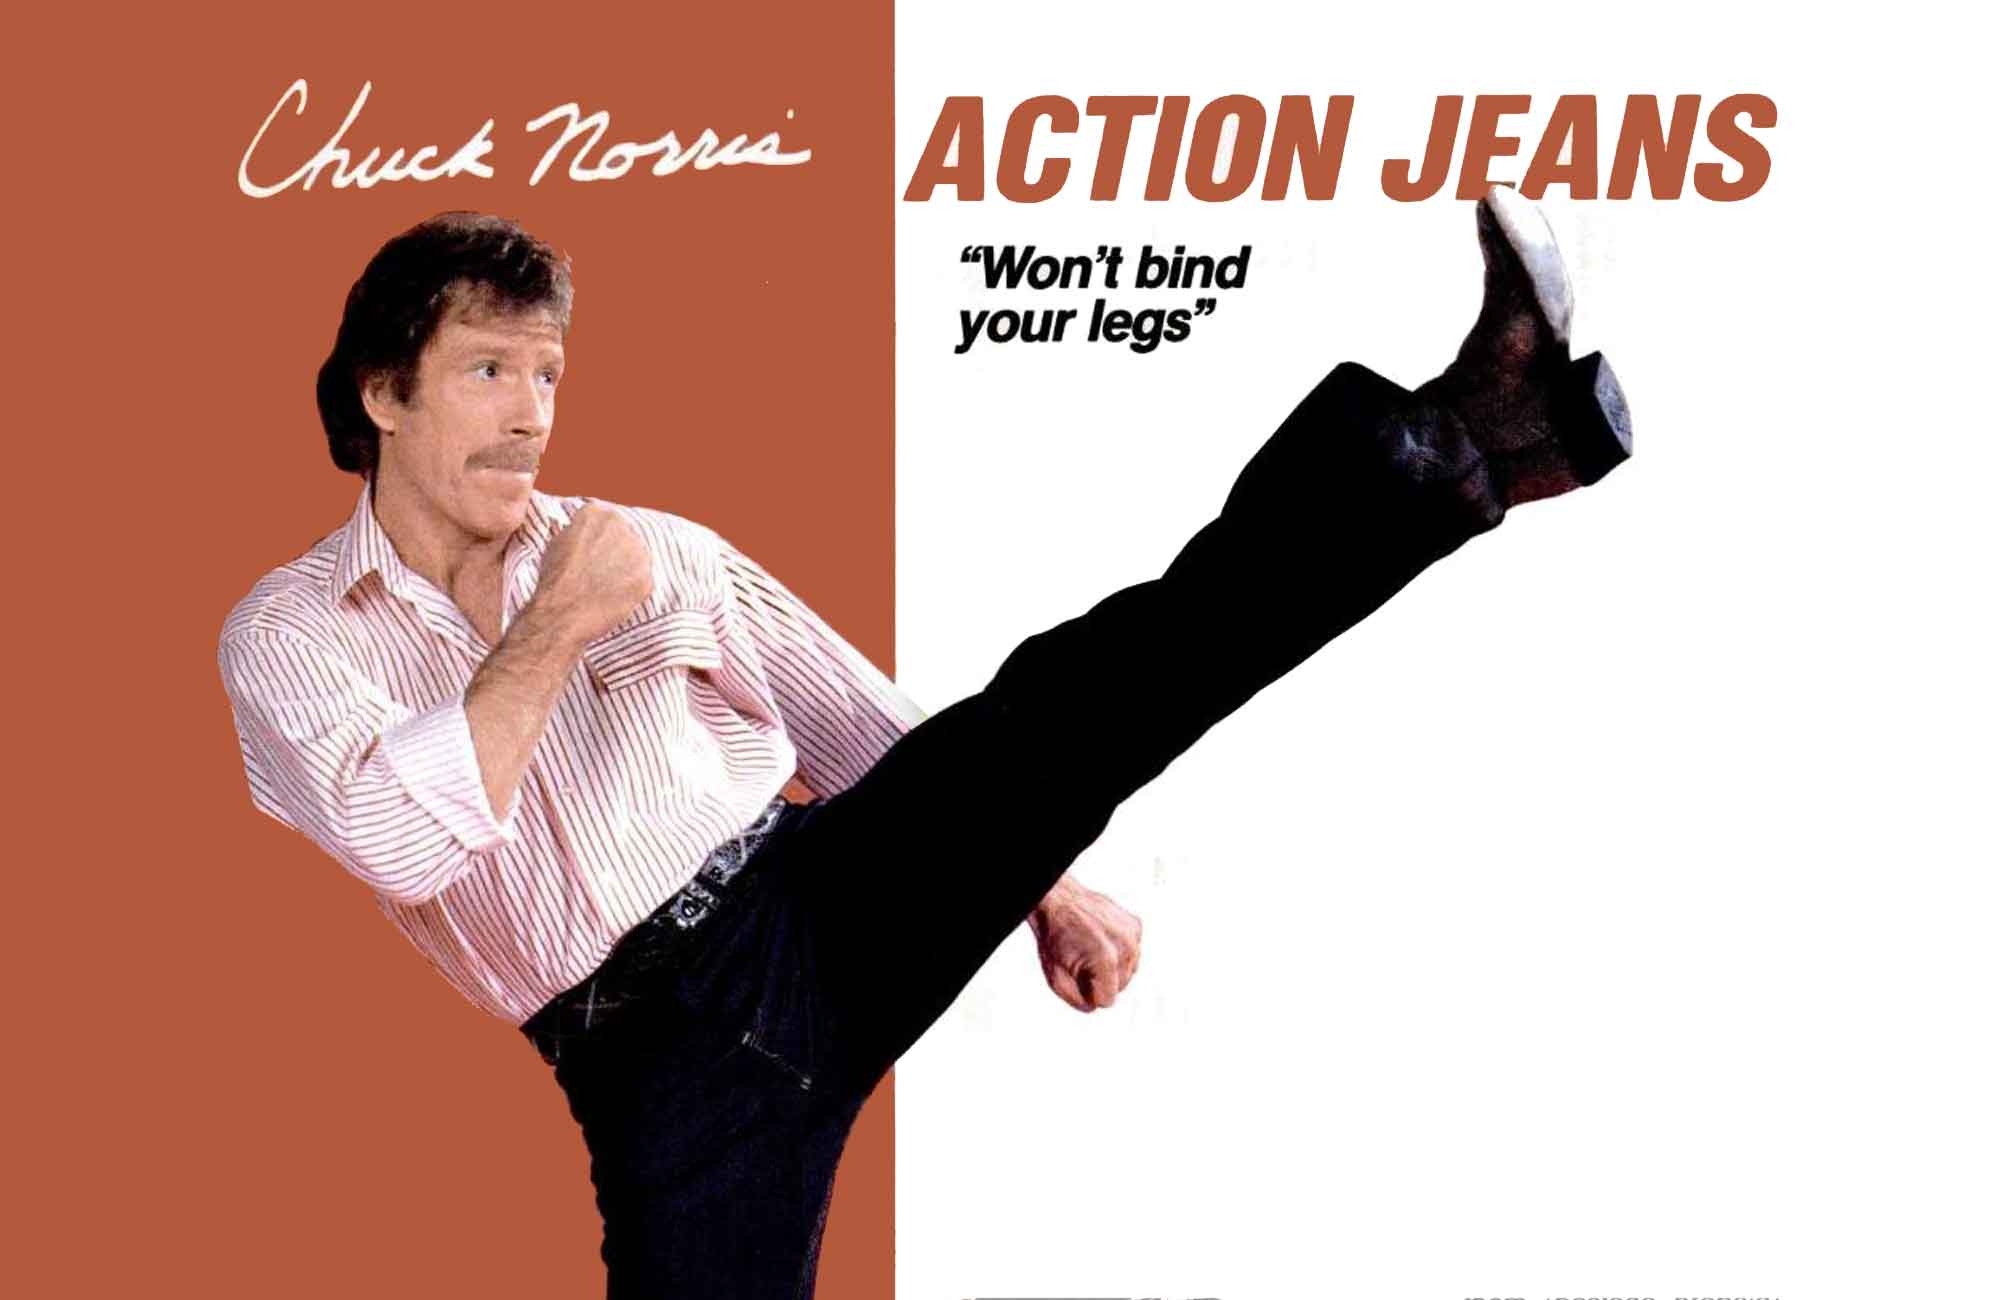 Chuck Norris Action Jeans: How To Kick Butt Without Ripping Your Pants.